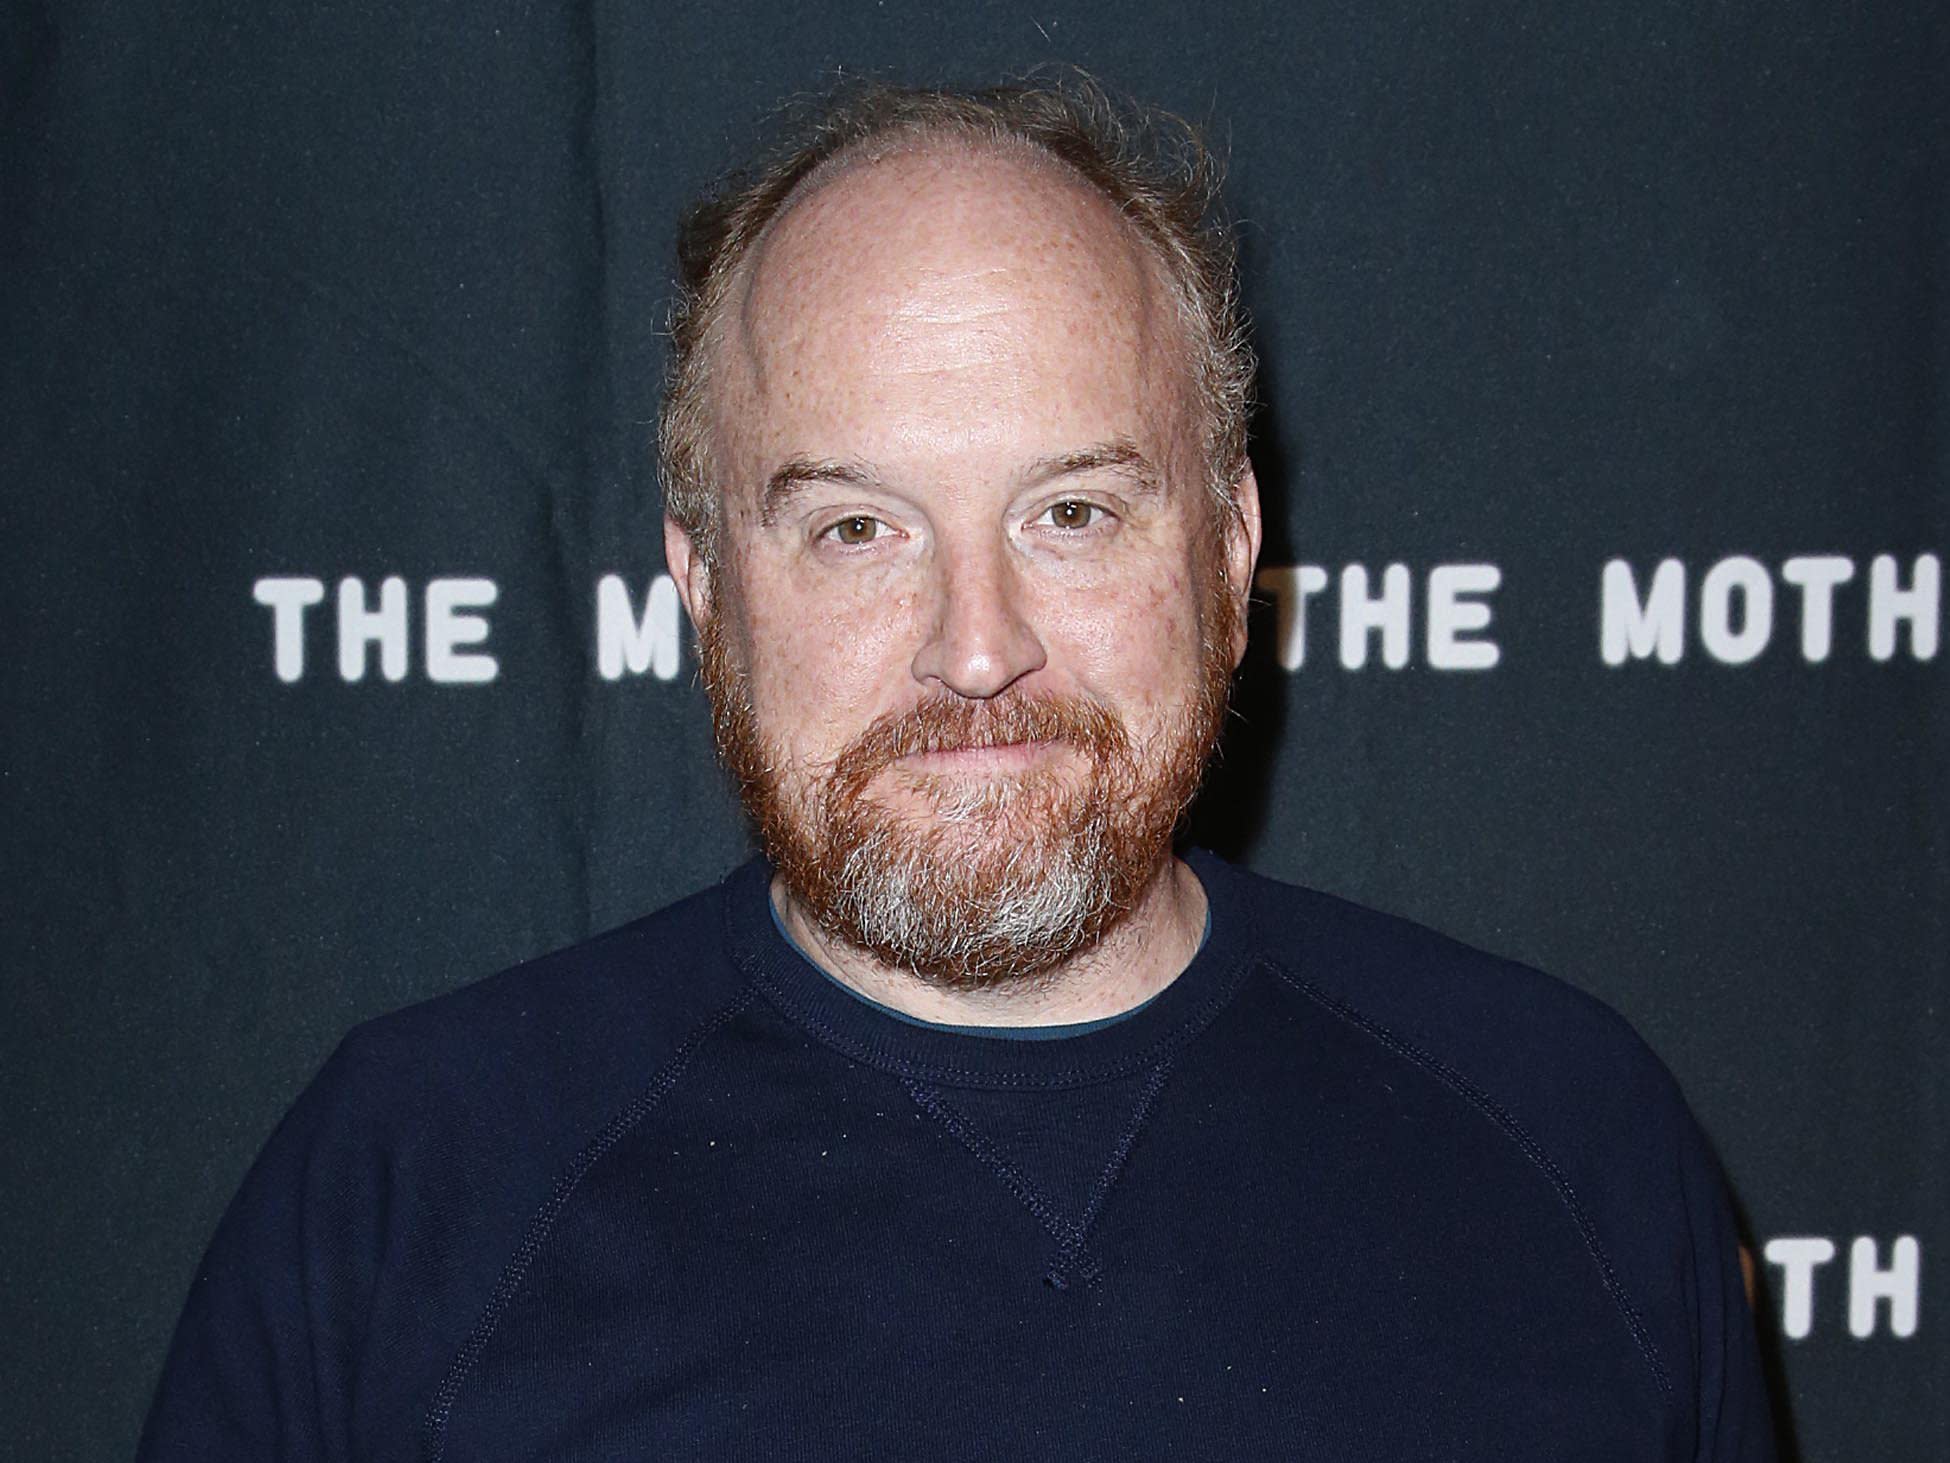 Louis C.K. mocks Parkland shooting survivors and queer community in leaked comedy set